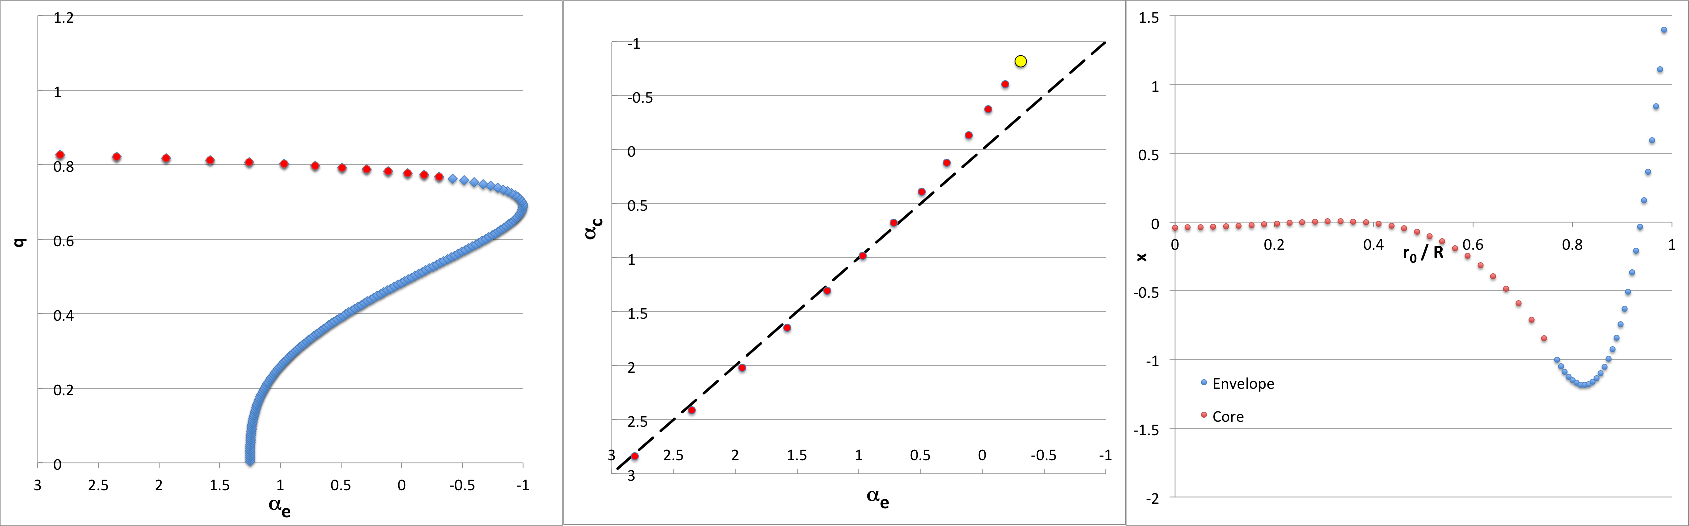 Results for (ell,j) = (2,2)